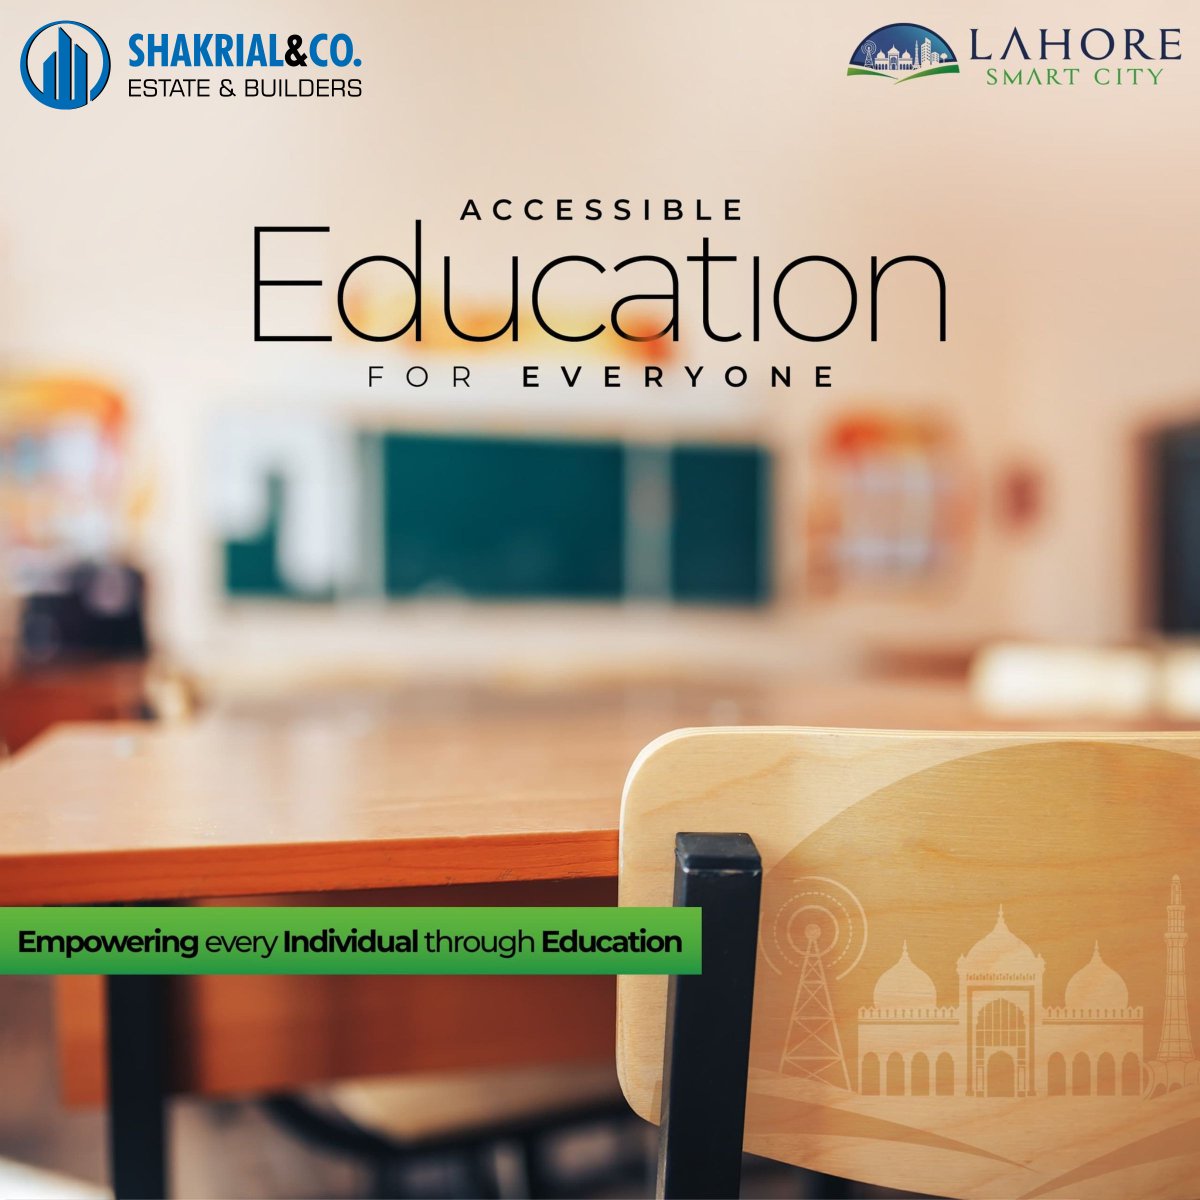 'Lahore Smart City: Empowering Minds, Enriching Lives – Where Education Knows No Bounds'

#shakrialandco #shakrial #shakrialandcoestateandbuilders #shakrialco #SmartCity #islamabad #LahoreSmartCity #SmartCity #EducationDistrict